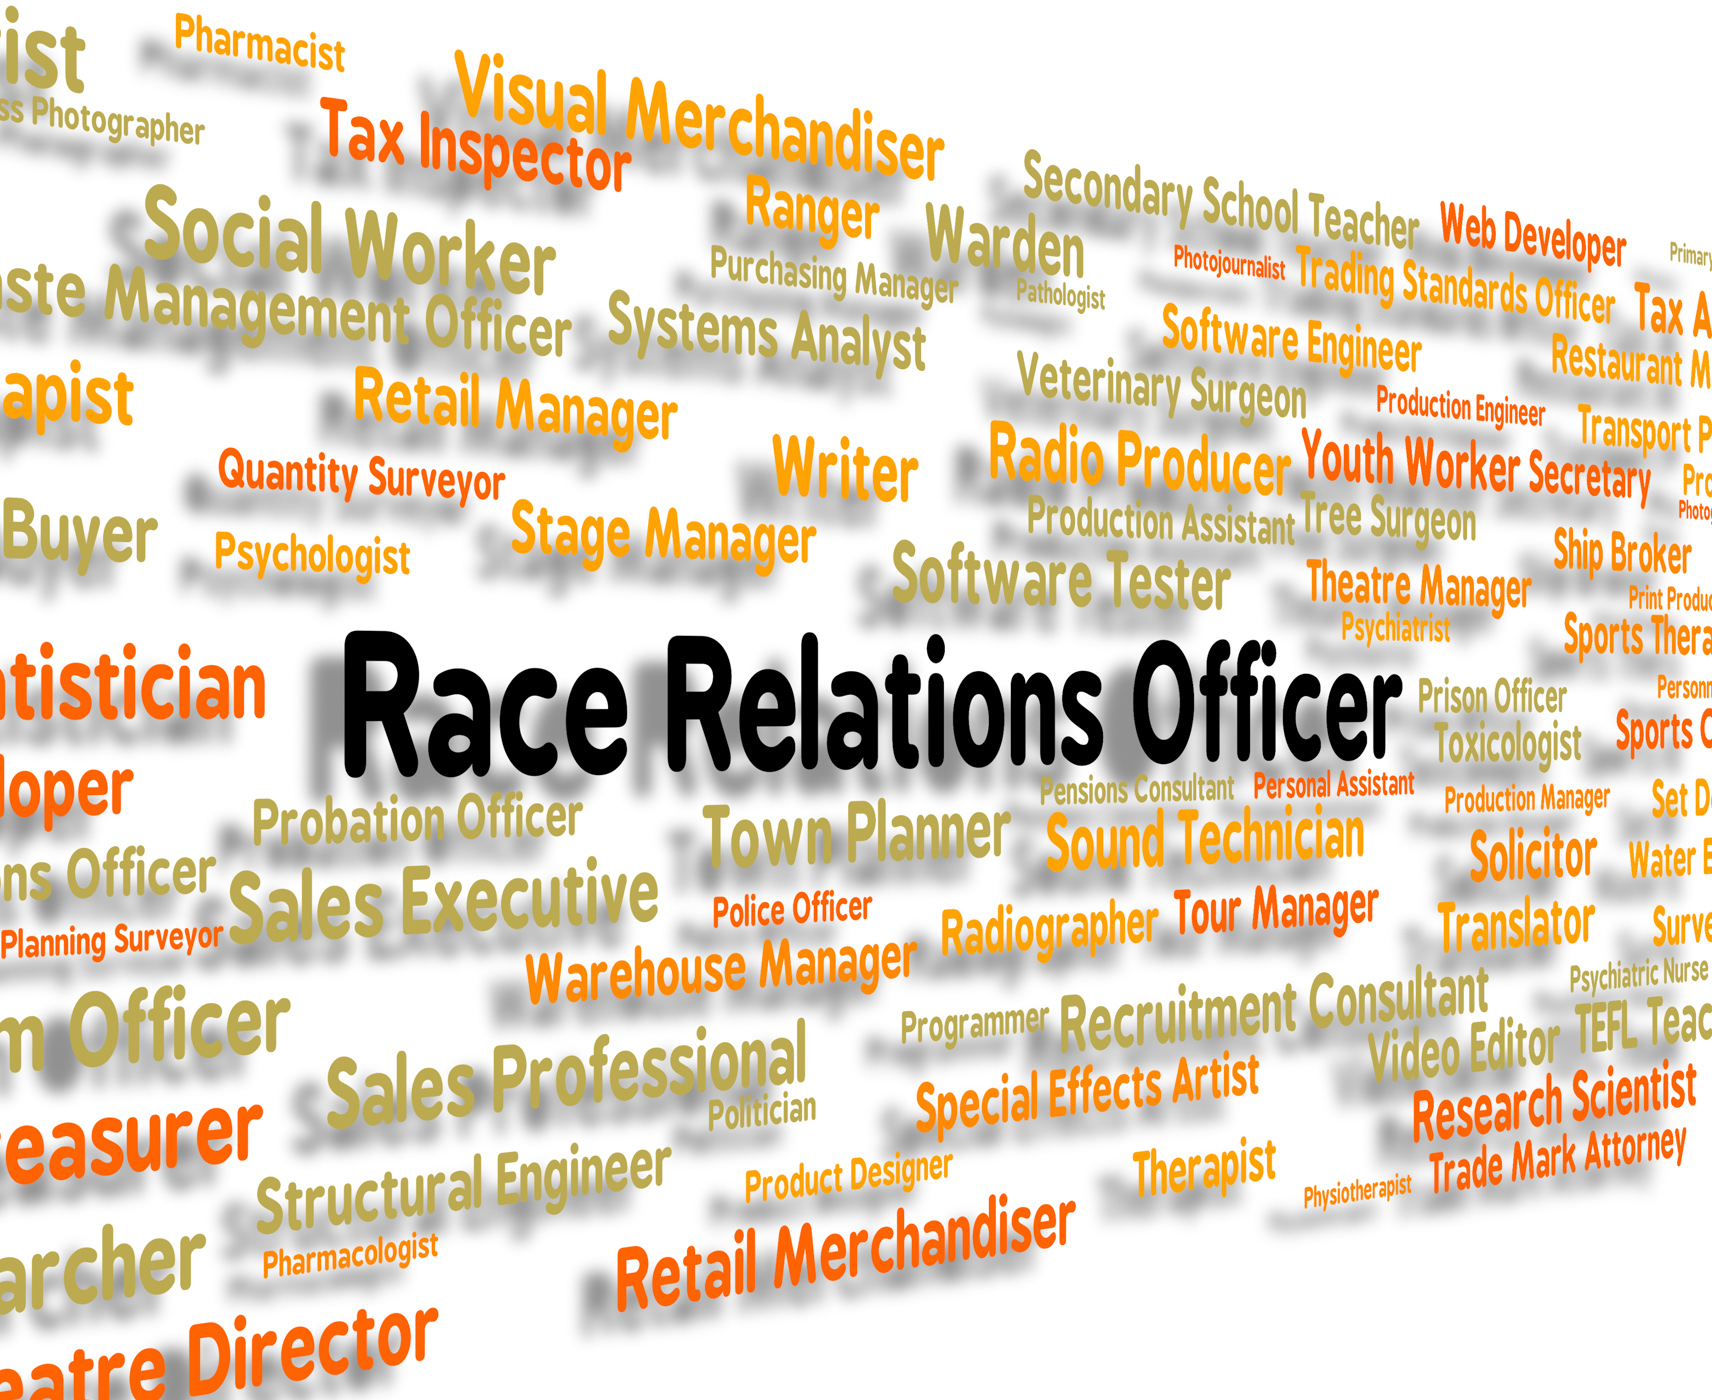 Race relations officer represents ethnicity hire and hiring photo